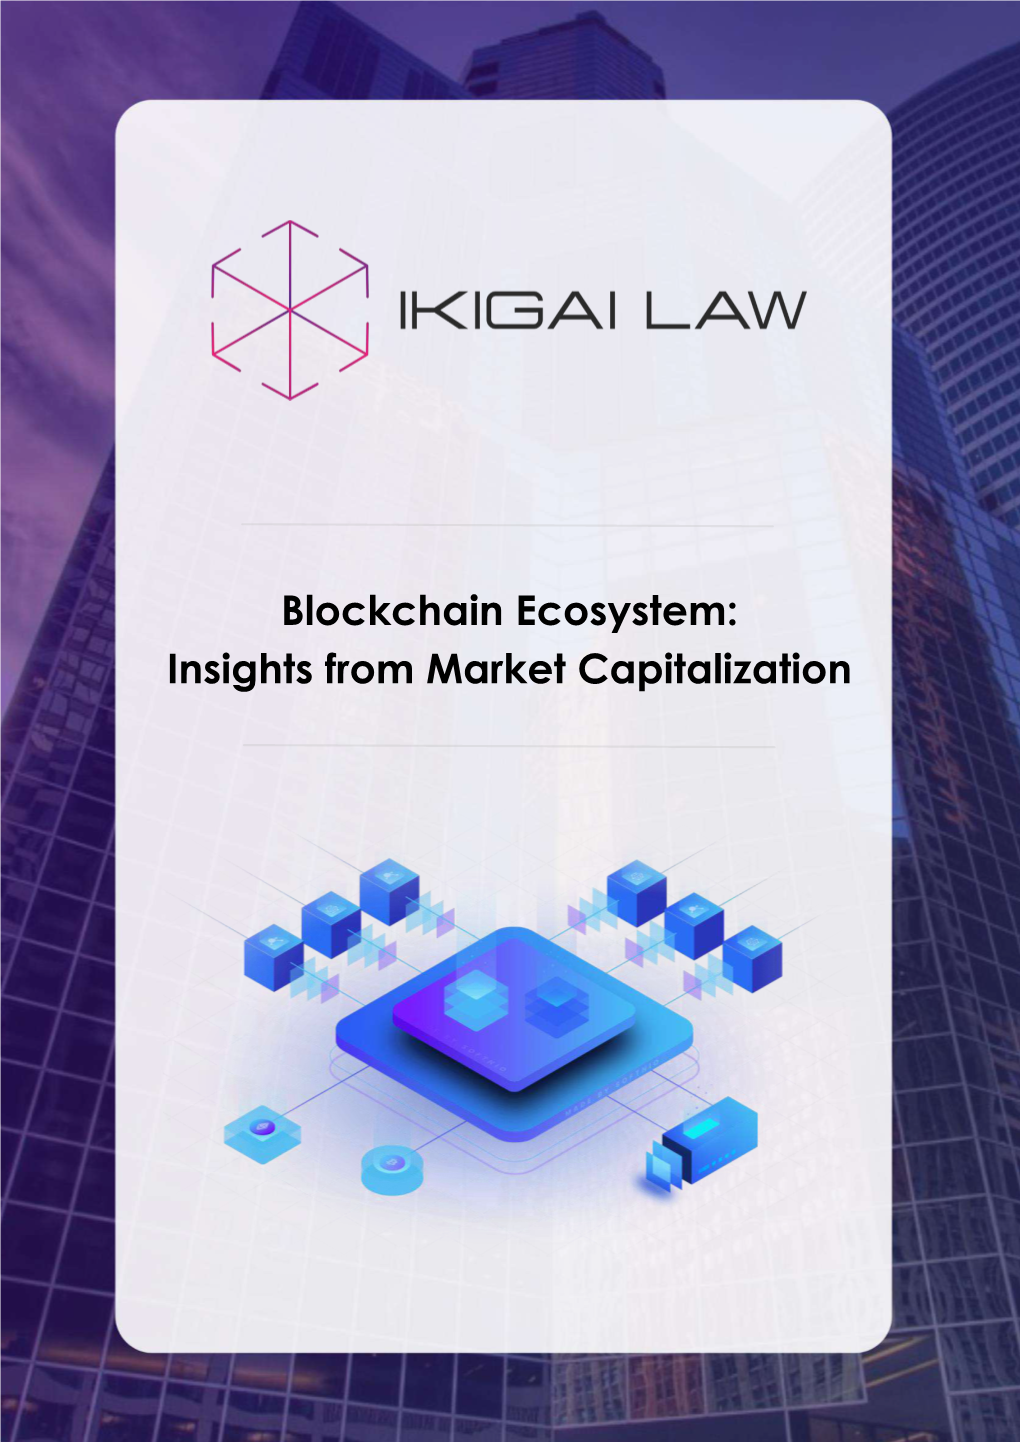 Blockchain Ecosystem: Insights from Market Capitalization ABOUT We Are an Award-Winning, General IKIGAI LAW Practice Law Firm